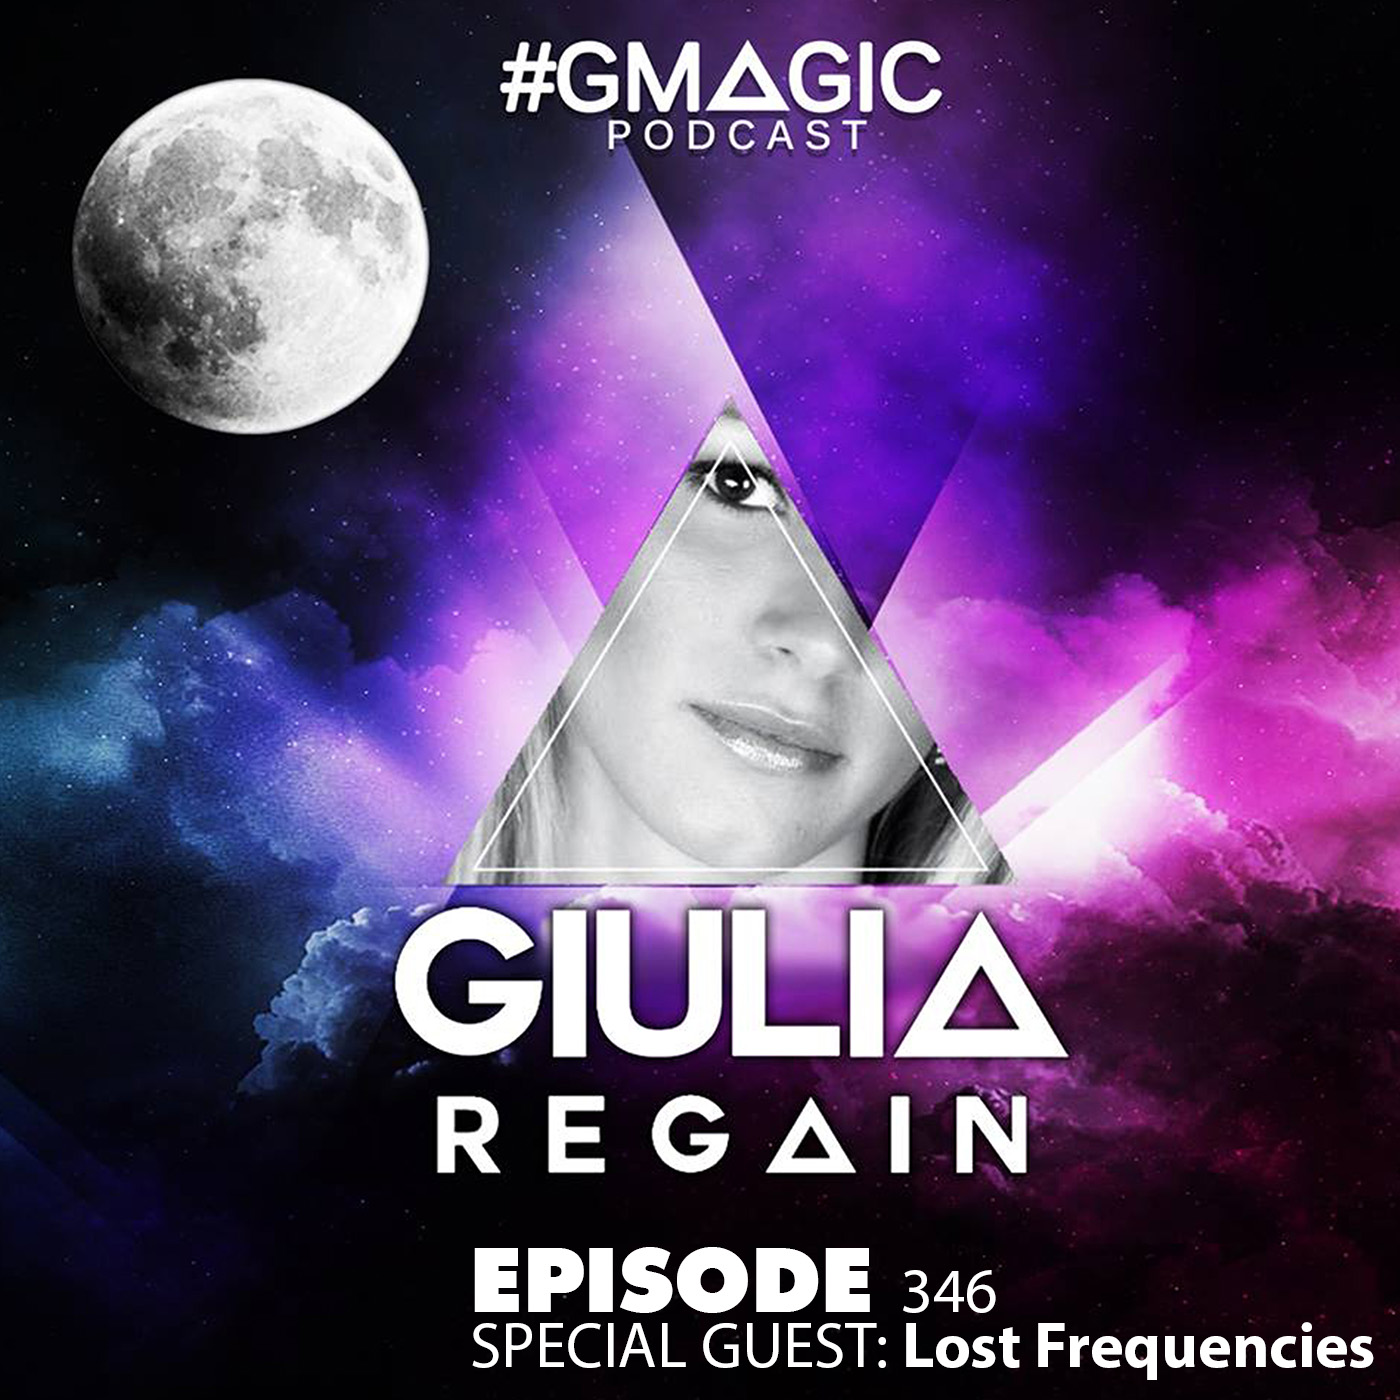 #Gmagic Podcast 346 - Special Guest: Lost Frequencies